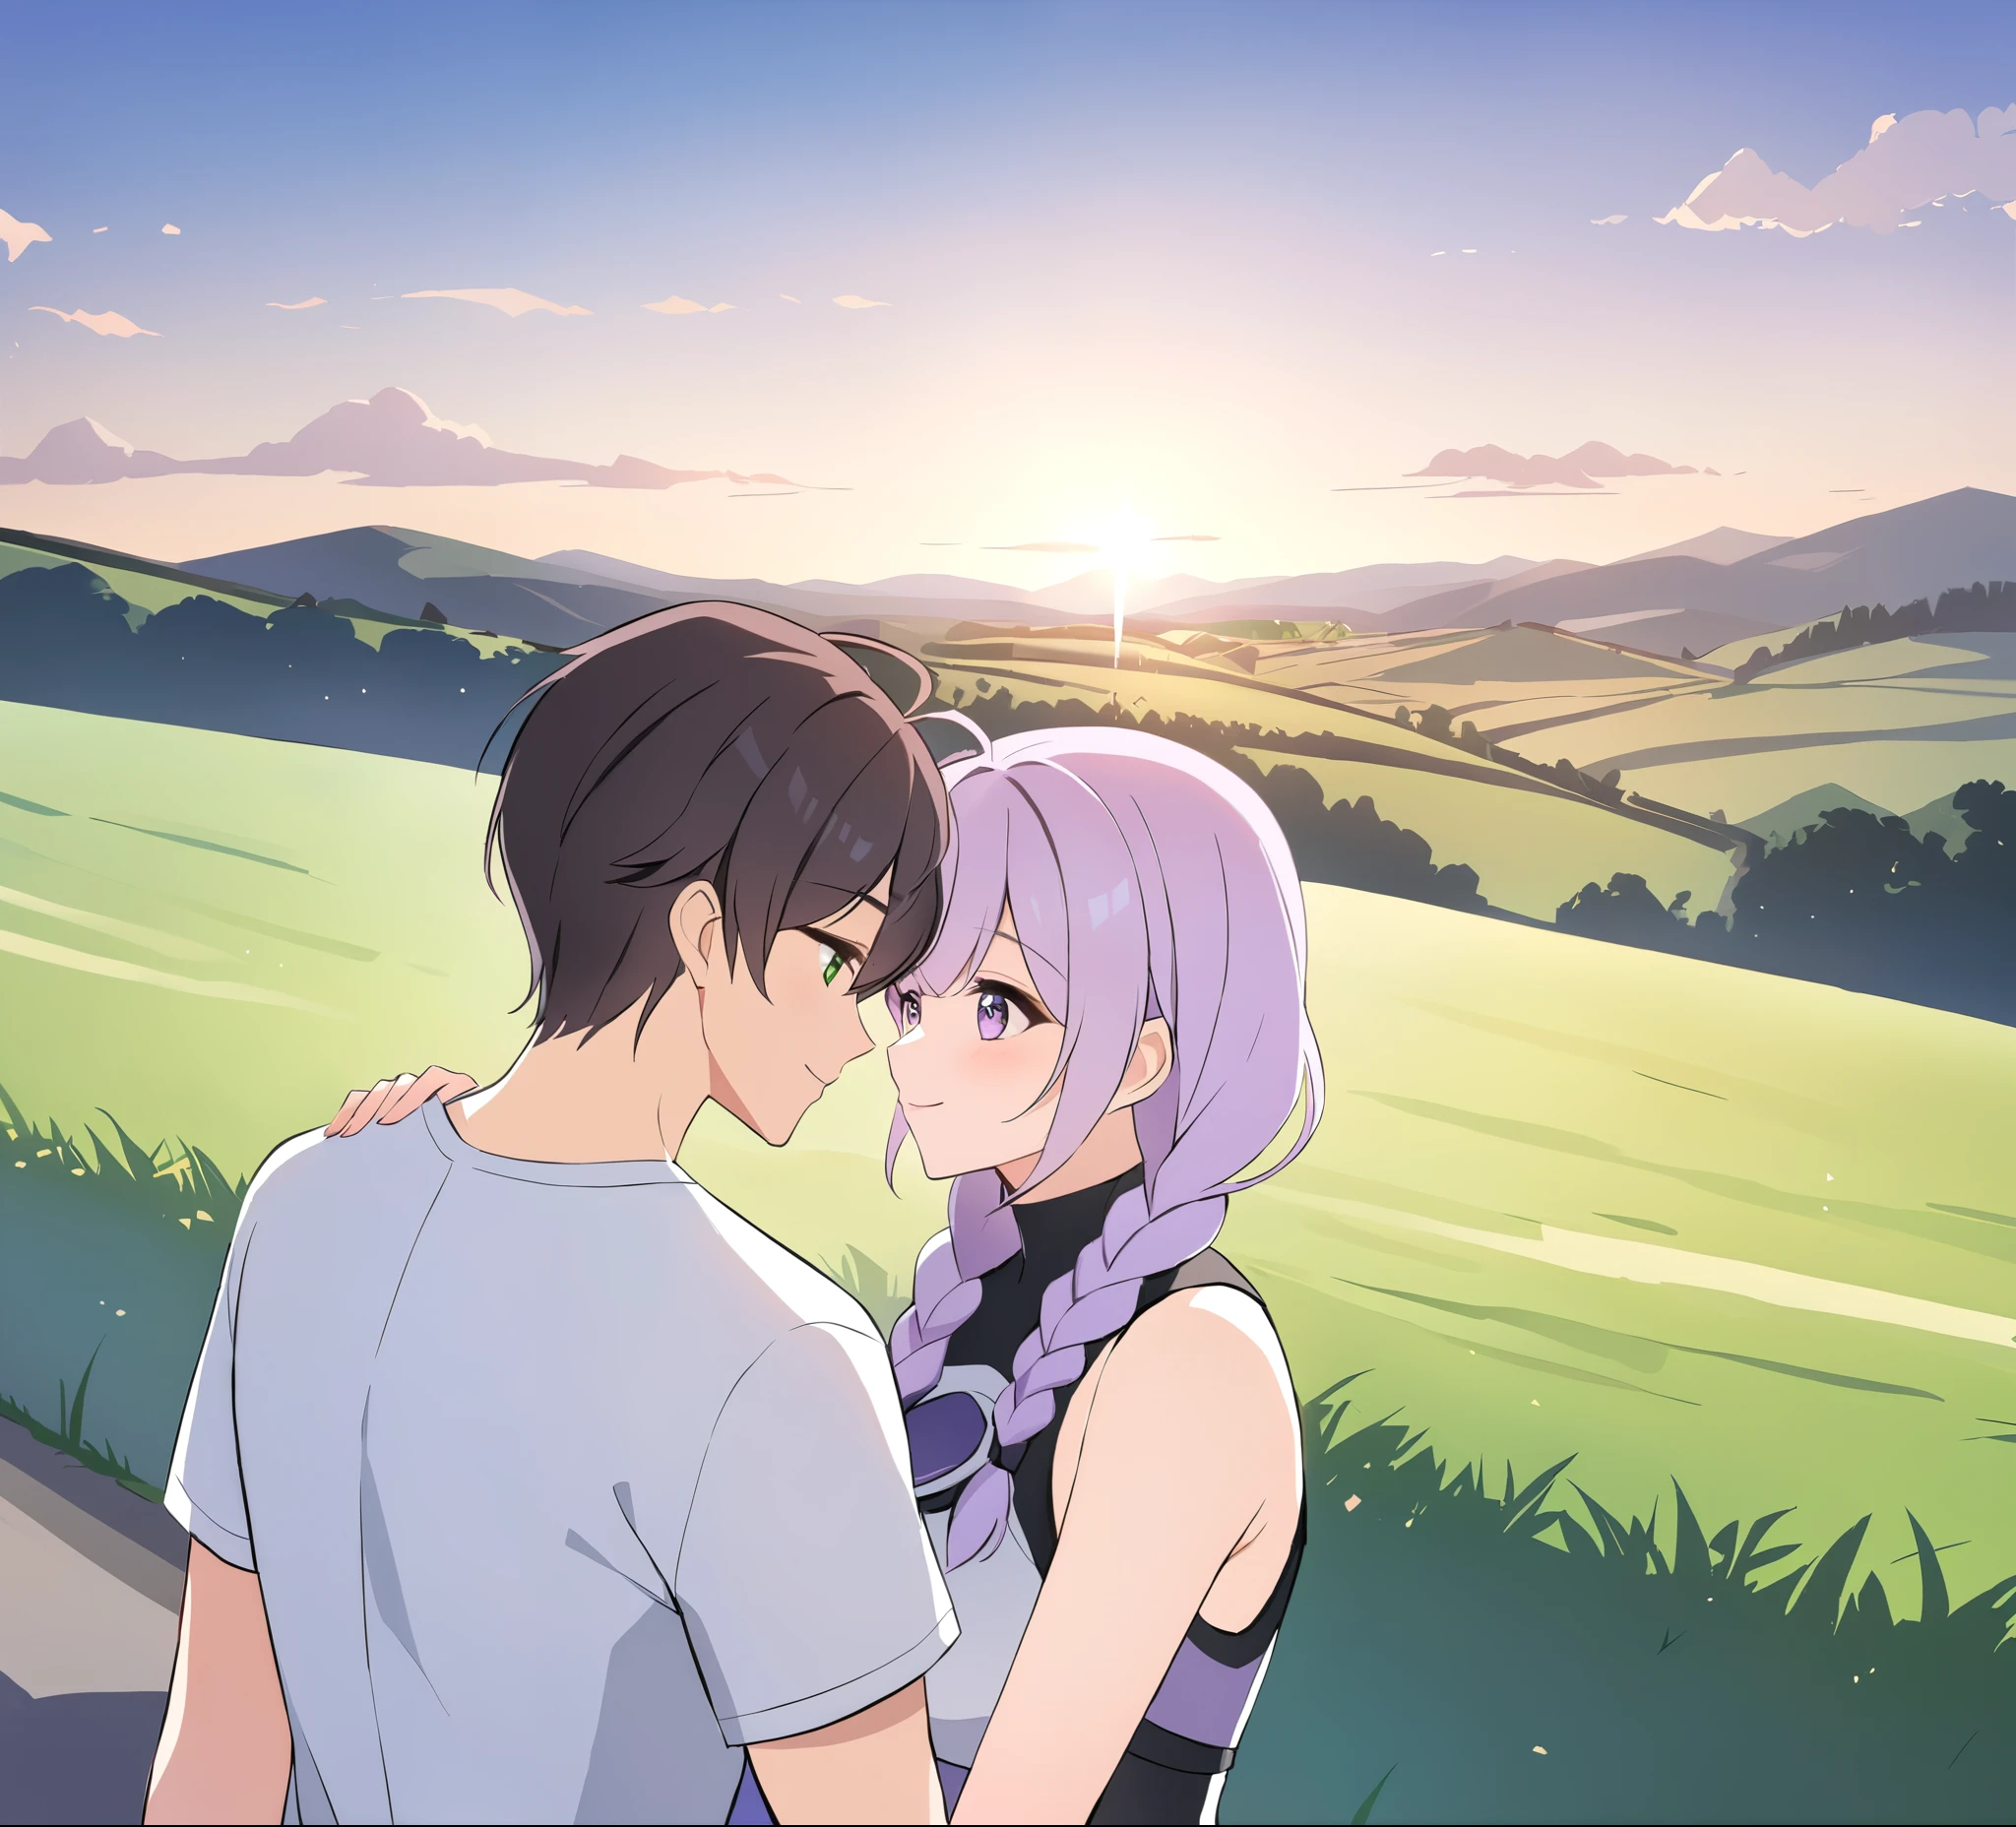 A couple(1 male, 1 woman with purple and white gradient double braids),Meet on a country road,Face to Face,Four eyes facing each other,Sunshine,The background is green fields and hills in the distance,Warmth,romantic,happiness